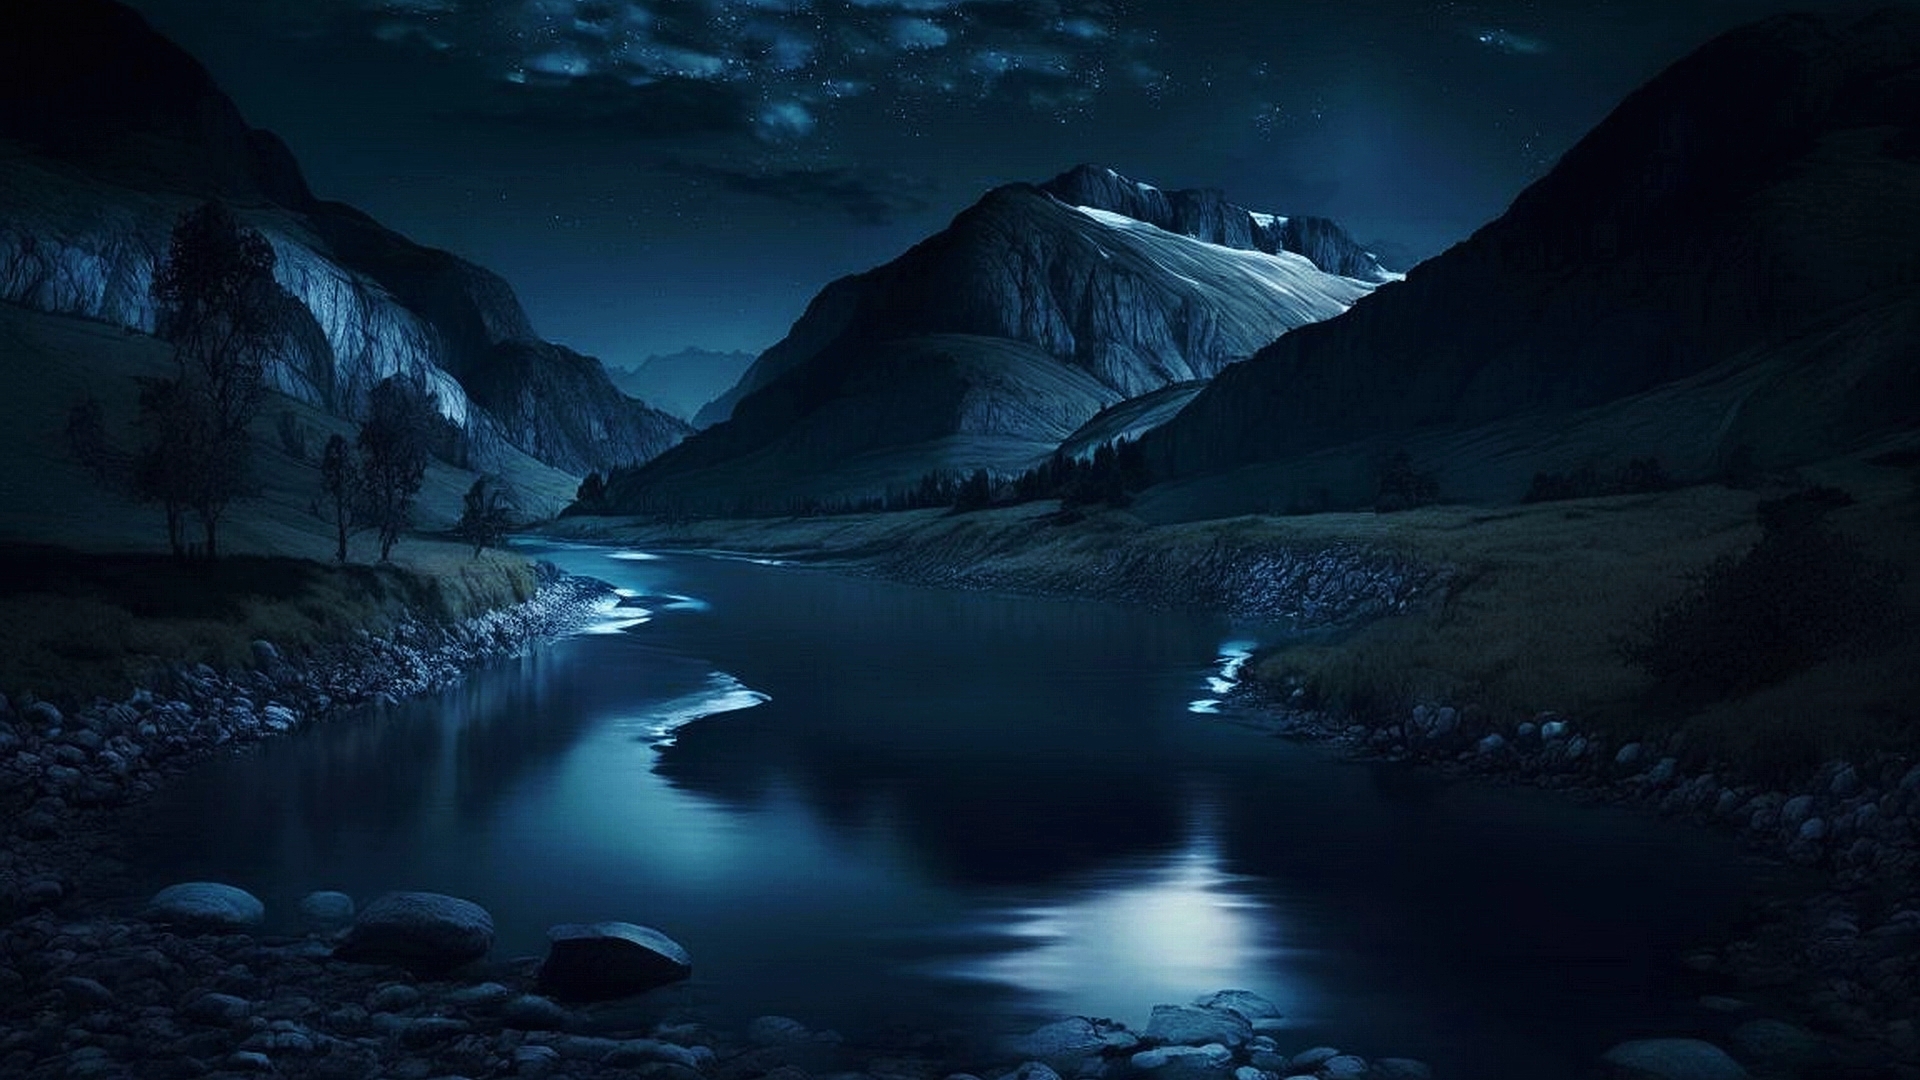 Night mountain landscape and river